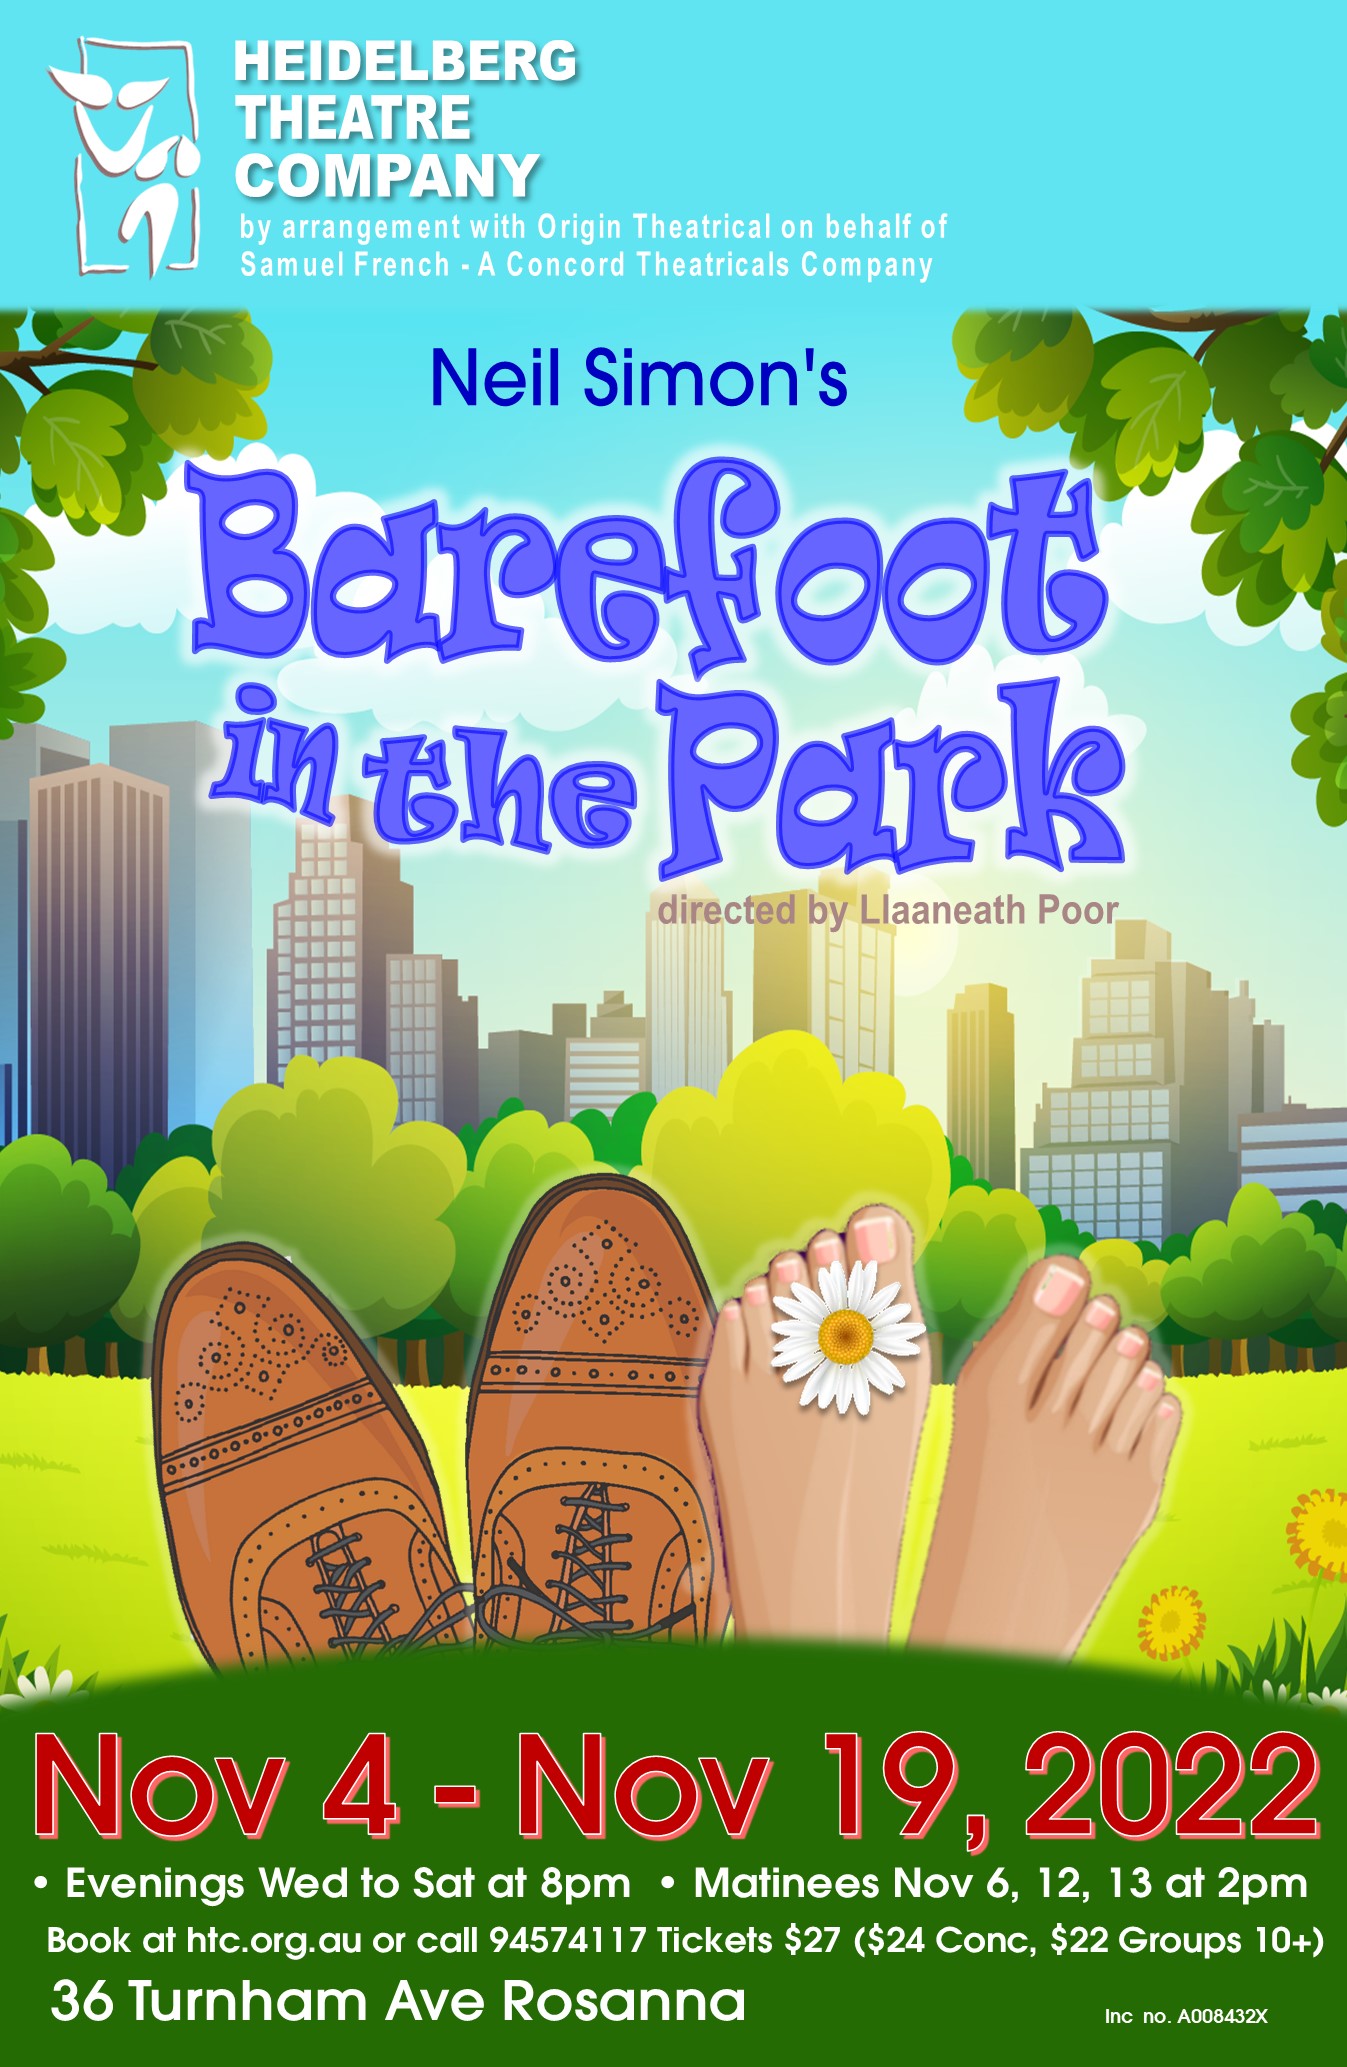 Barefoot in the park